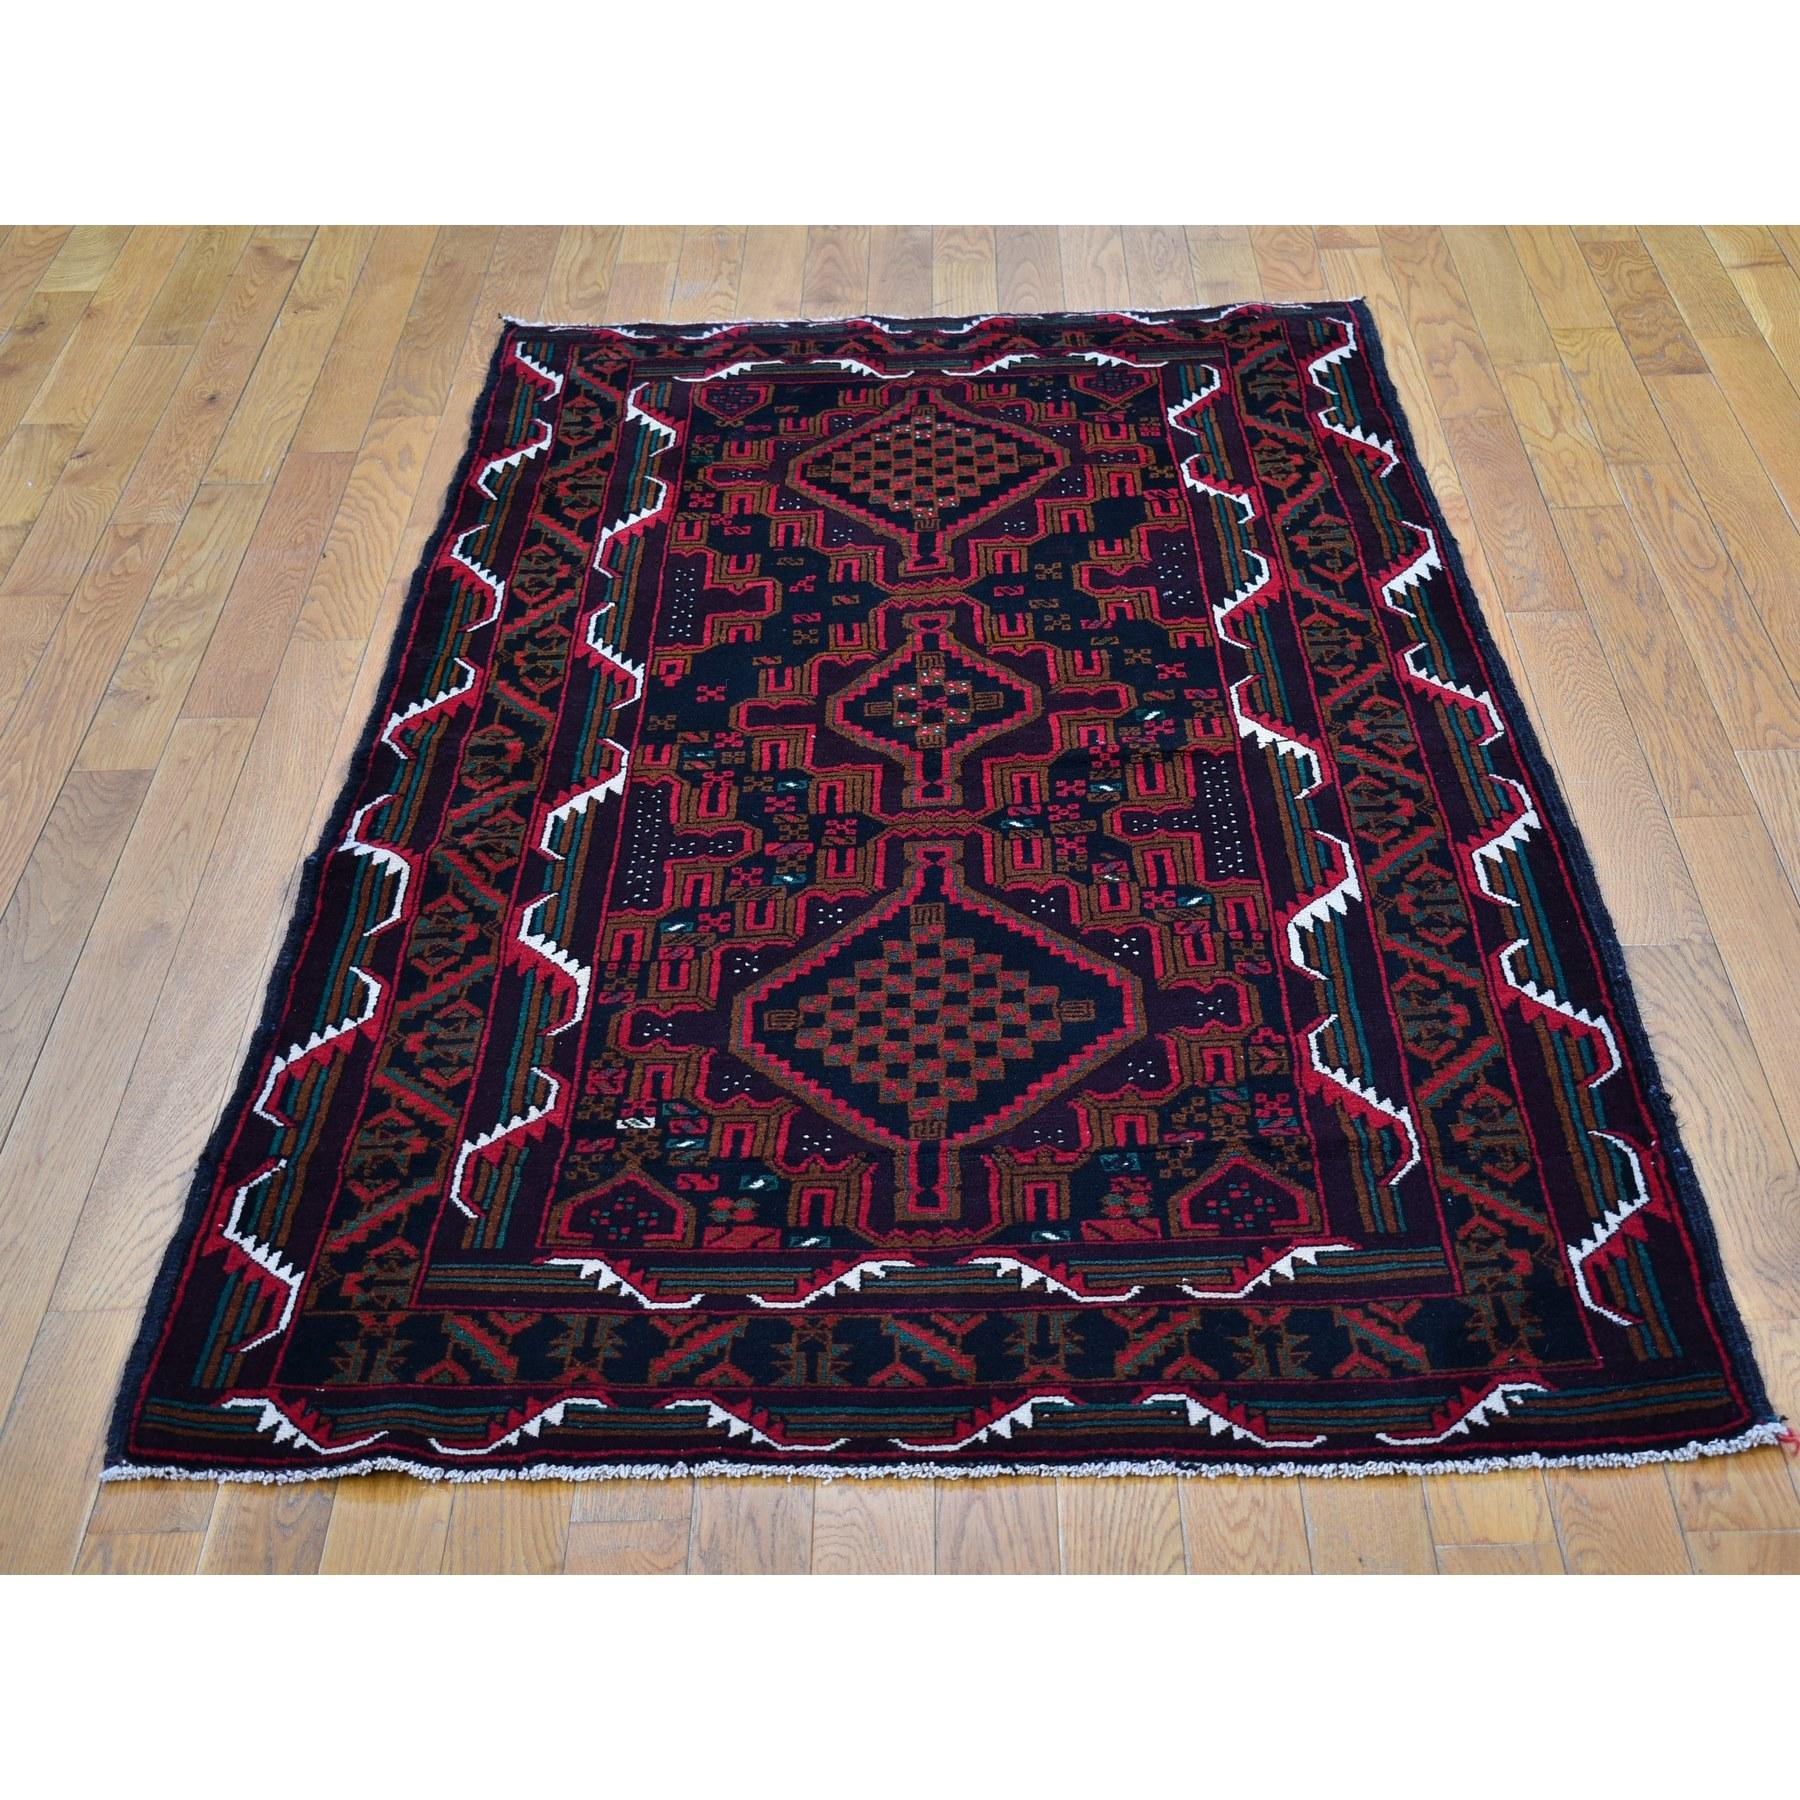 This fabulous hand-knotted carpet has been created and designed for extra strength and durability. This rug has been handcrafted for weeks in the traditional method that is used to make
Exact Rug Size in Feet and Inches : 3'8